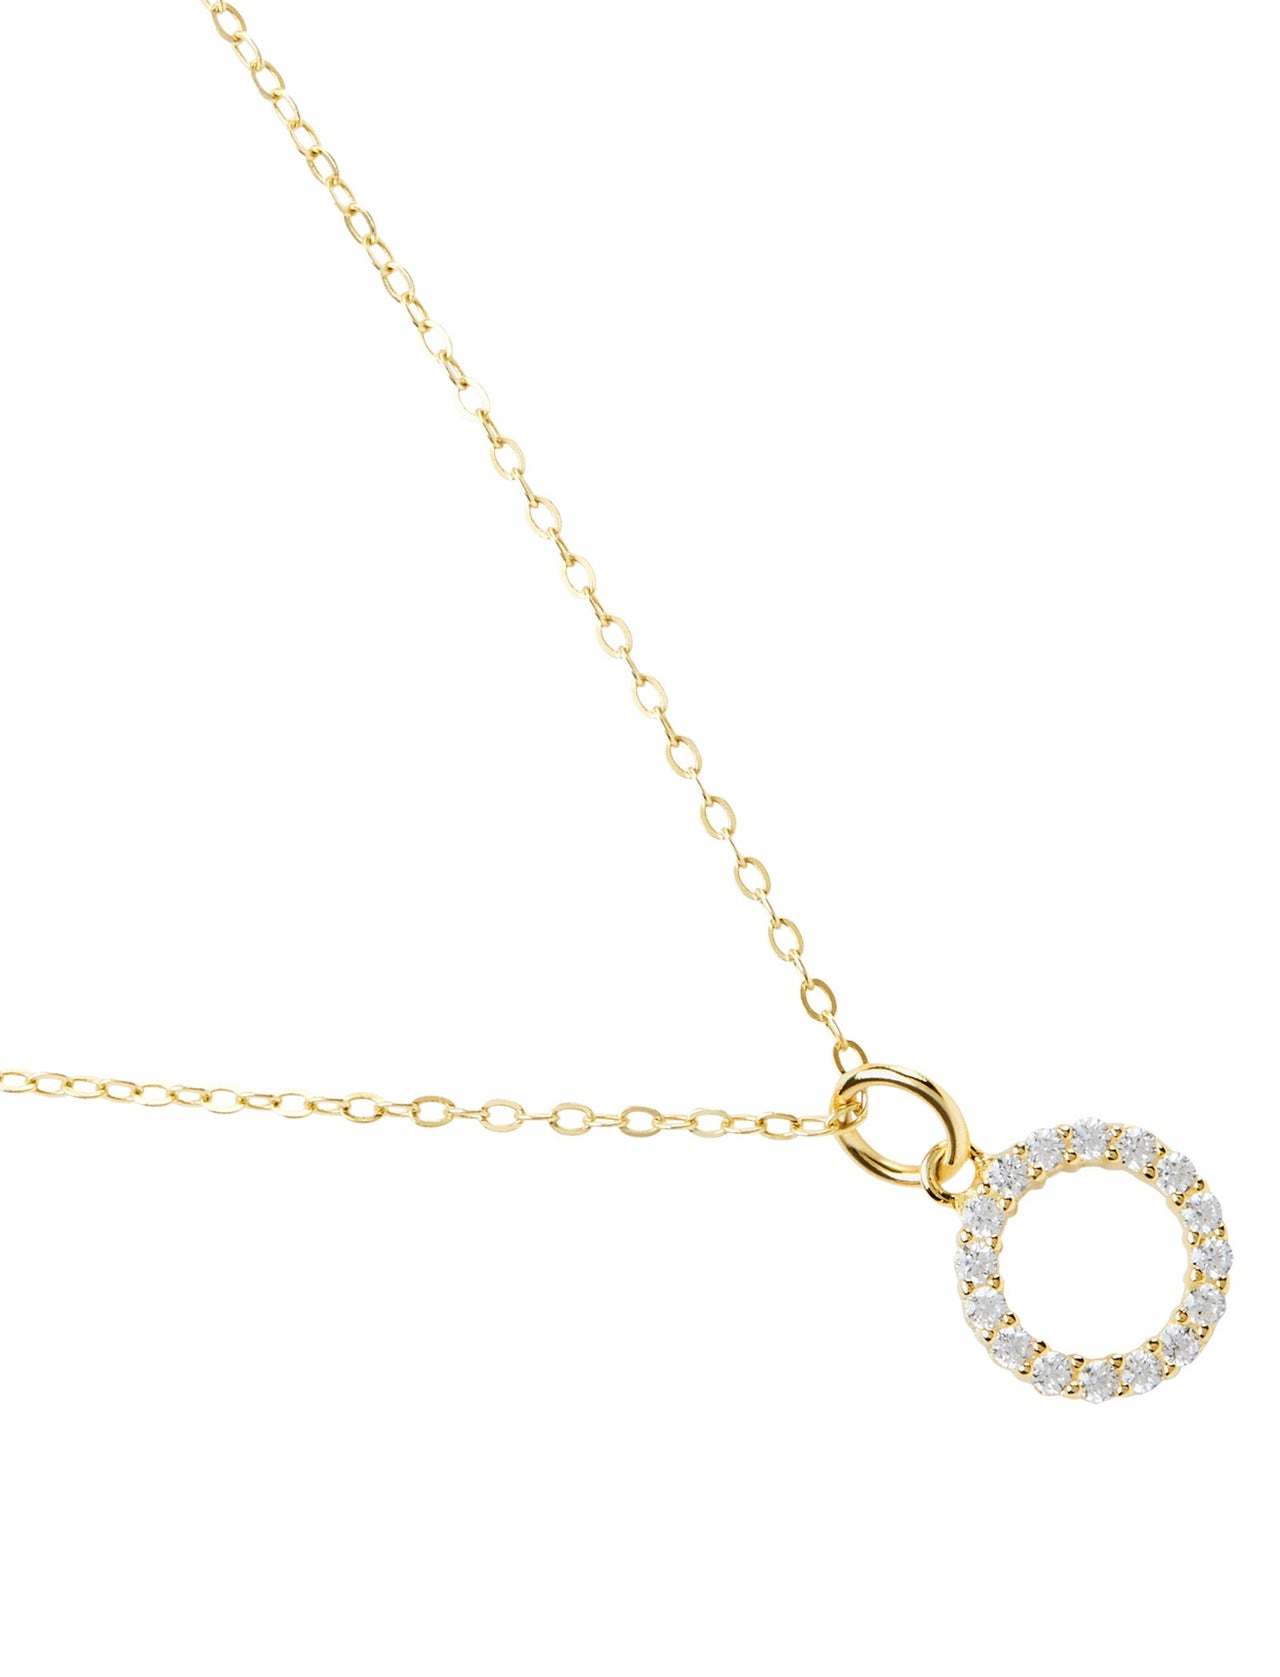 Maliyah Necklace – Pastiche